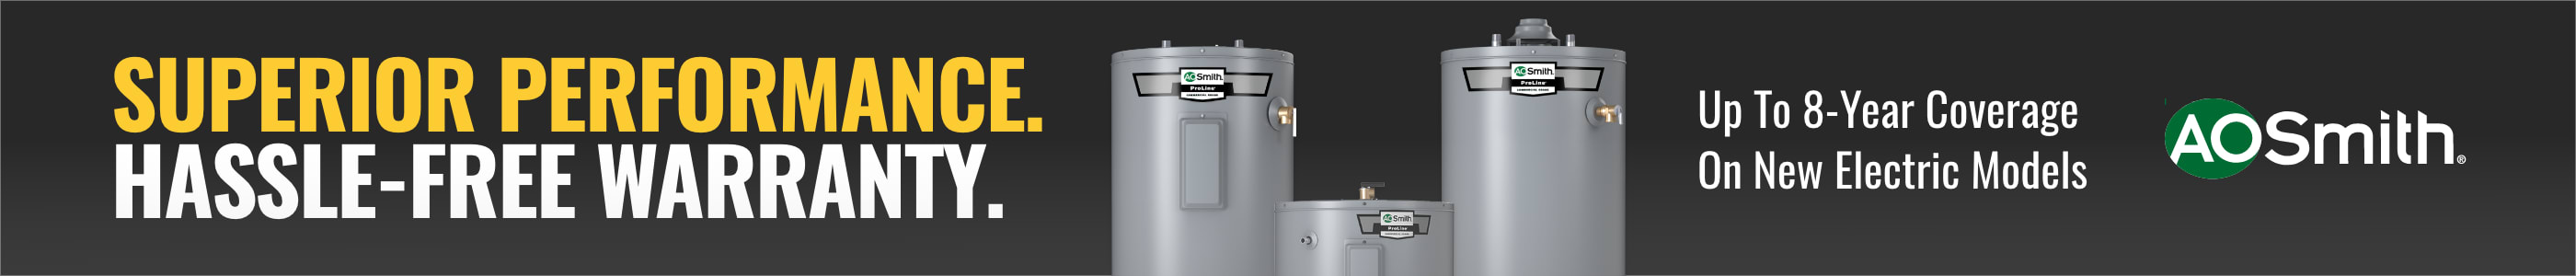 A.O. Smith Water Heaters - Performance & peace of mind. Up To 8-Year Coverage On New Electric Models.